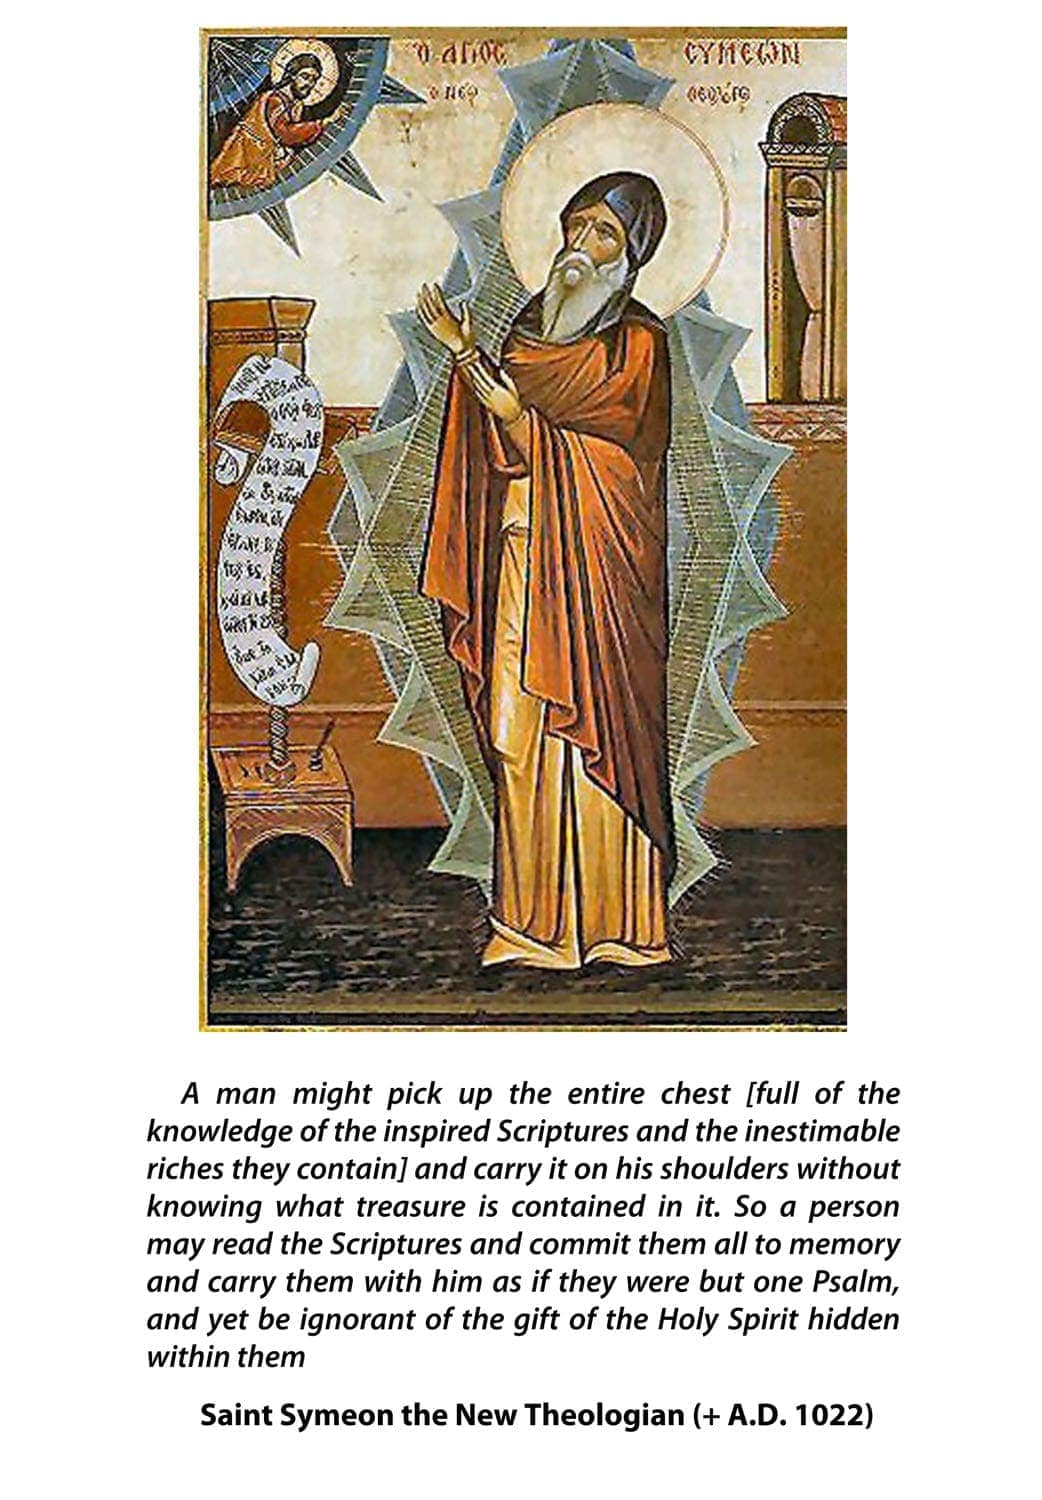 Saint-Symeon-the-New-Theologian-Holy-Scripture